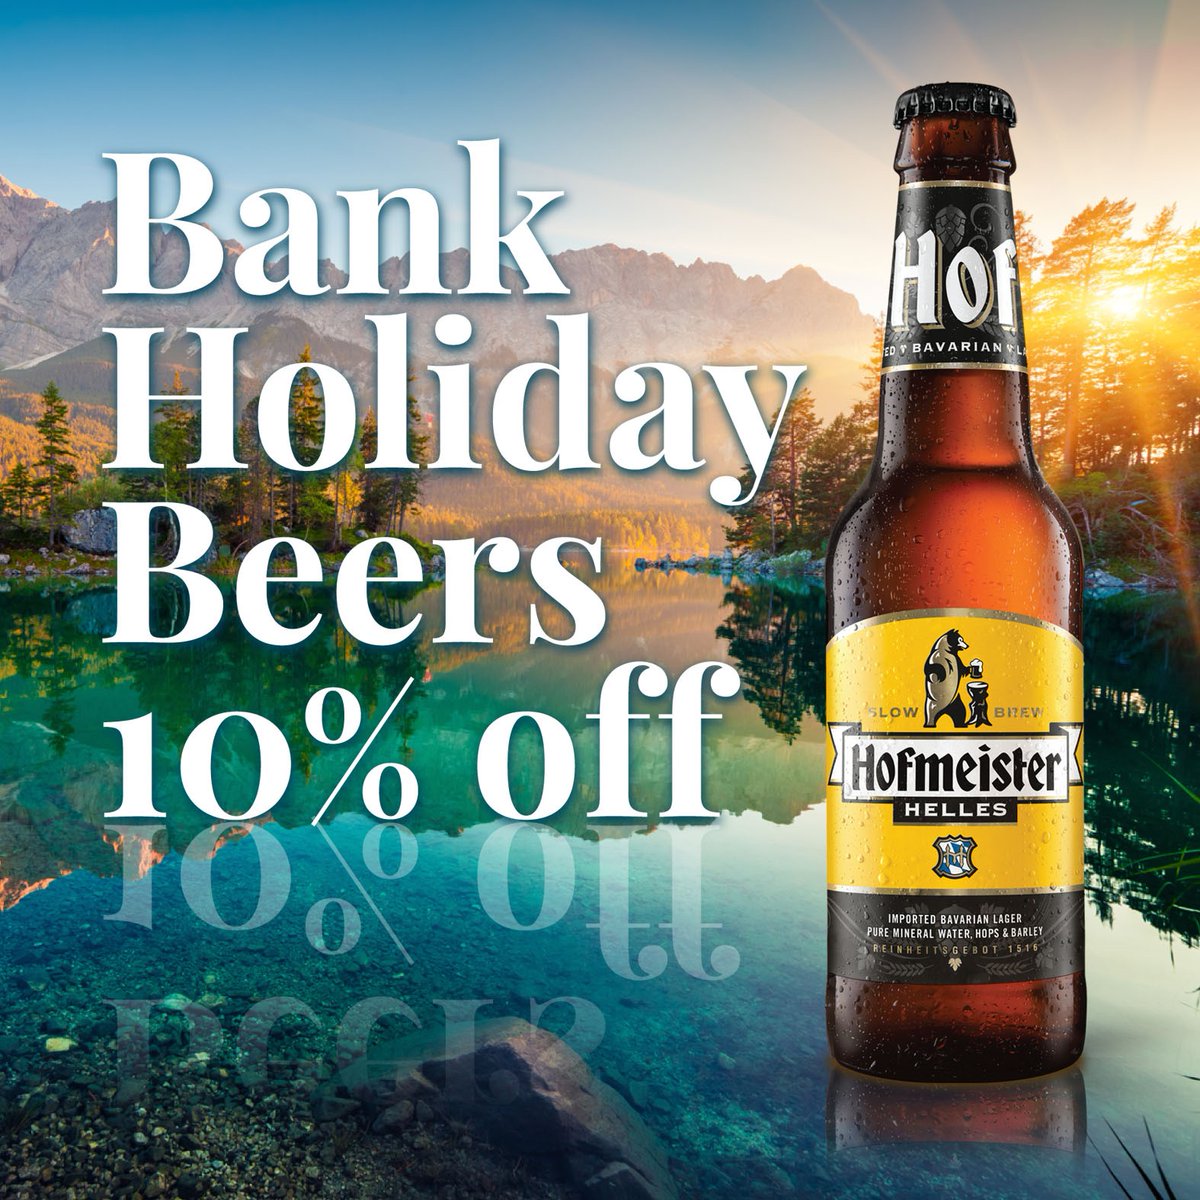 We can't guarantee sunshine but we can make sure your beer is bright and golden for the Bank Holiday. 🍺 Here's a special 10% off at the Hof Shop. Use code MAYDAYBEERS when you check out before midday on Thurs 2nd May. hofmeister.pulse.ly/lqupsqtqmu #FollowTheBear #BankHoliday